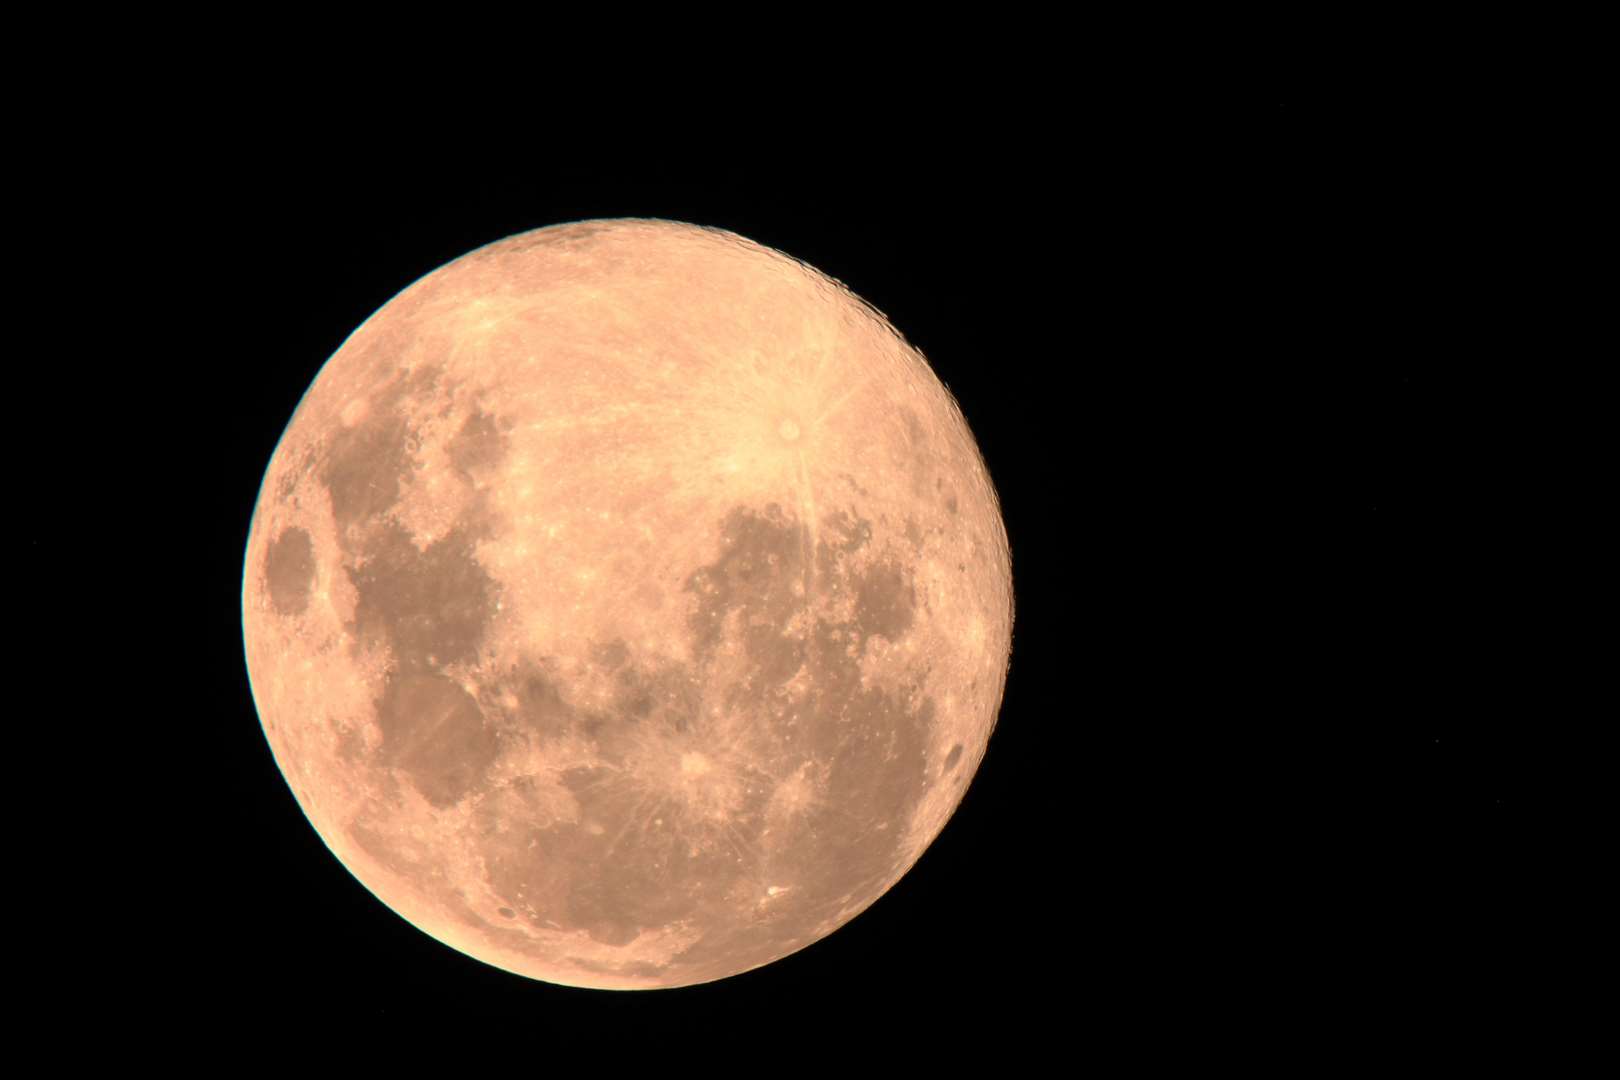 April's full moon is called the Pink Moon